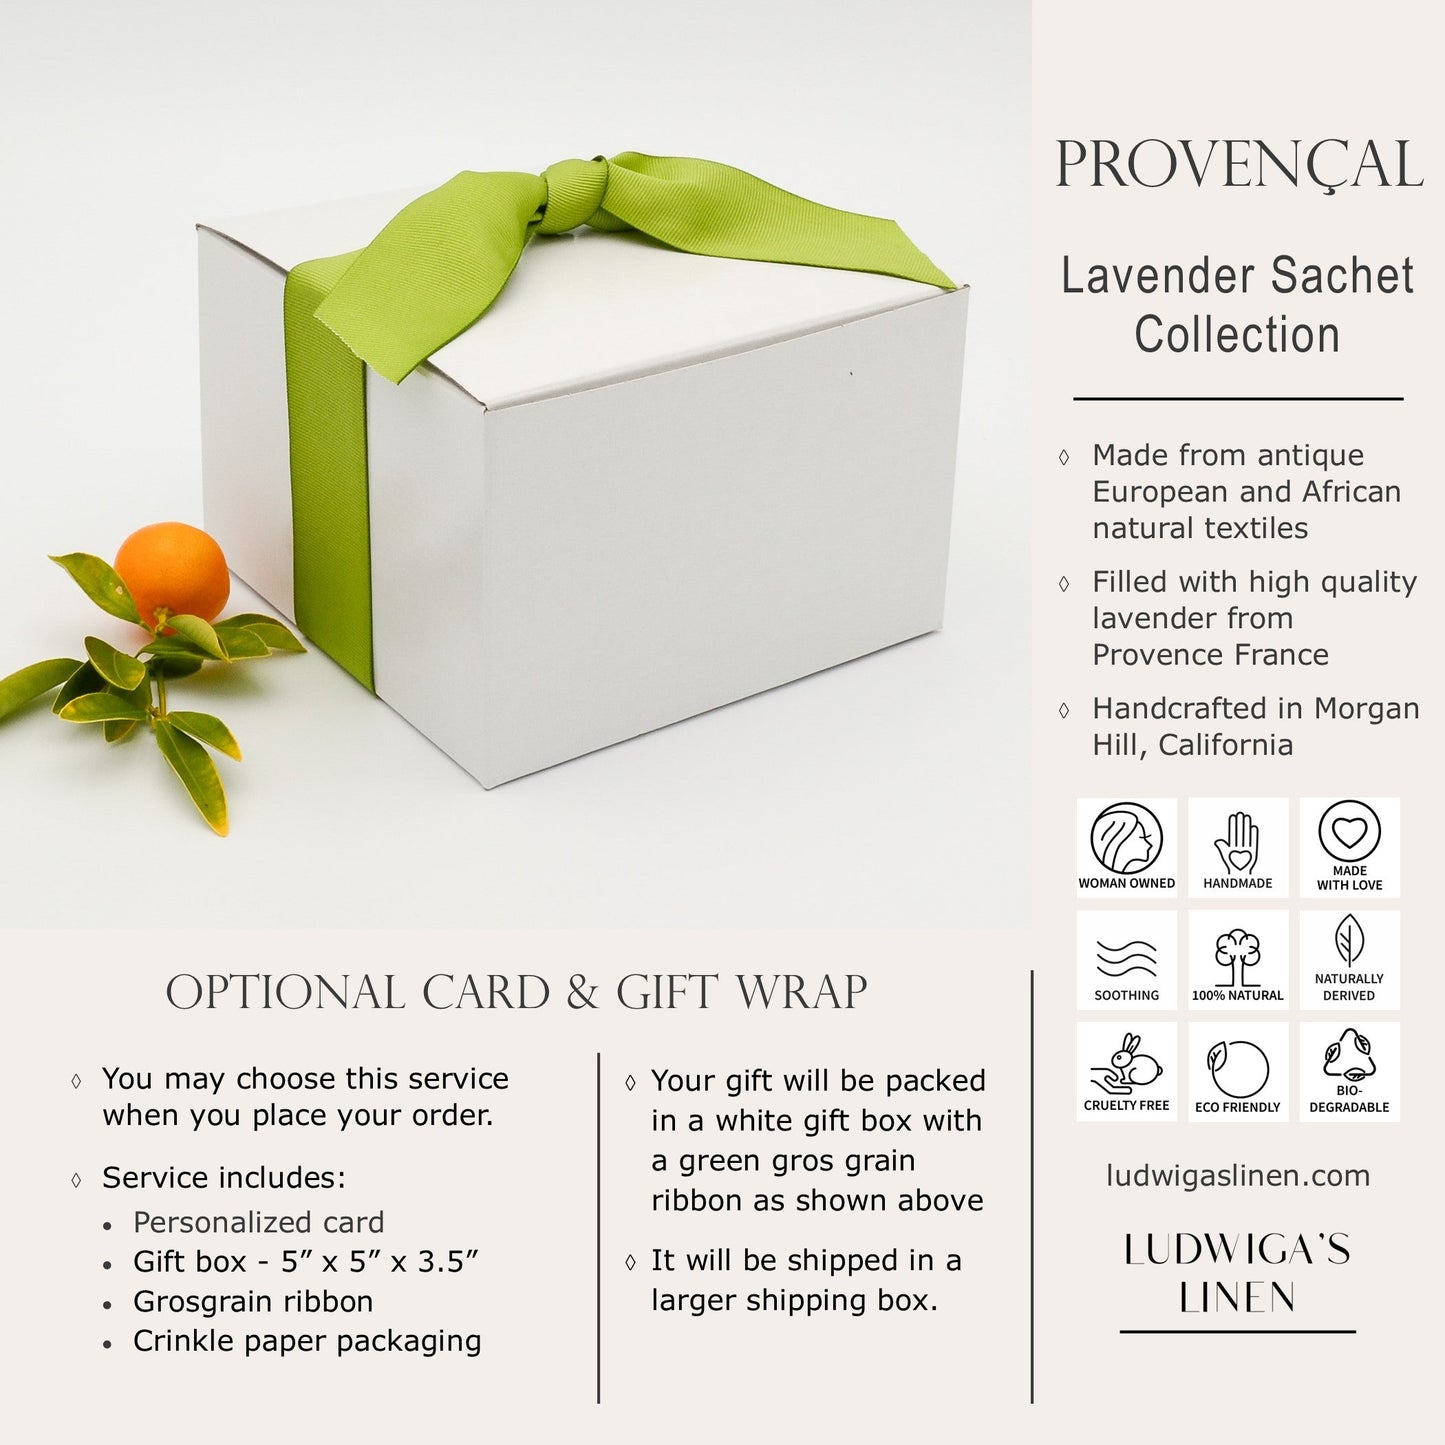 Optional gift box with red gros grain ribbon, information about Ludwiga's Linen Provençal sachet collection and shipping information